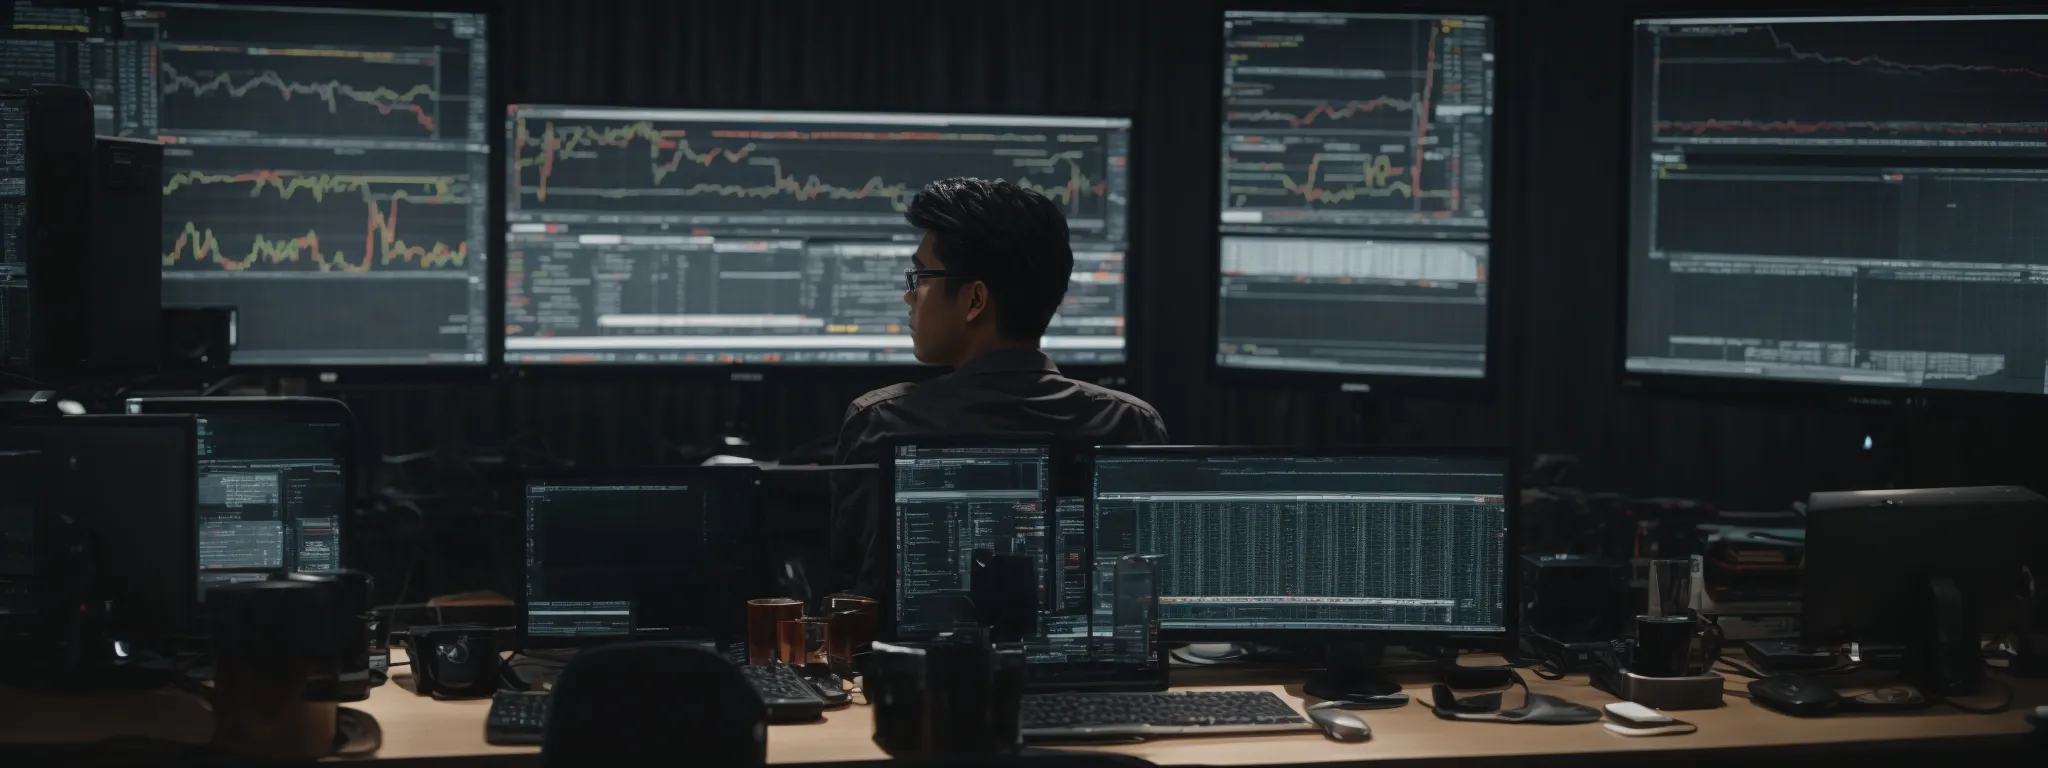 a webmaster sits before multiple computer screens displaying analytics dashboards and website code editors.